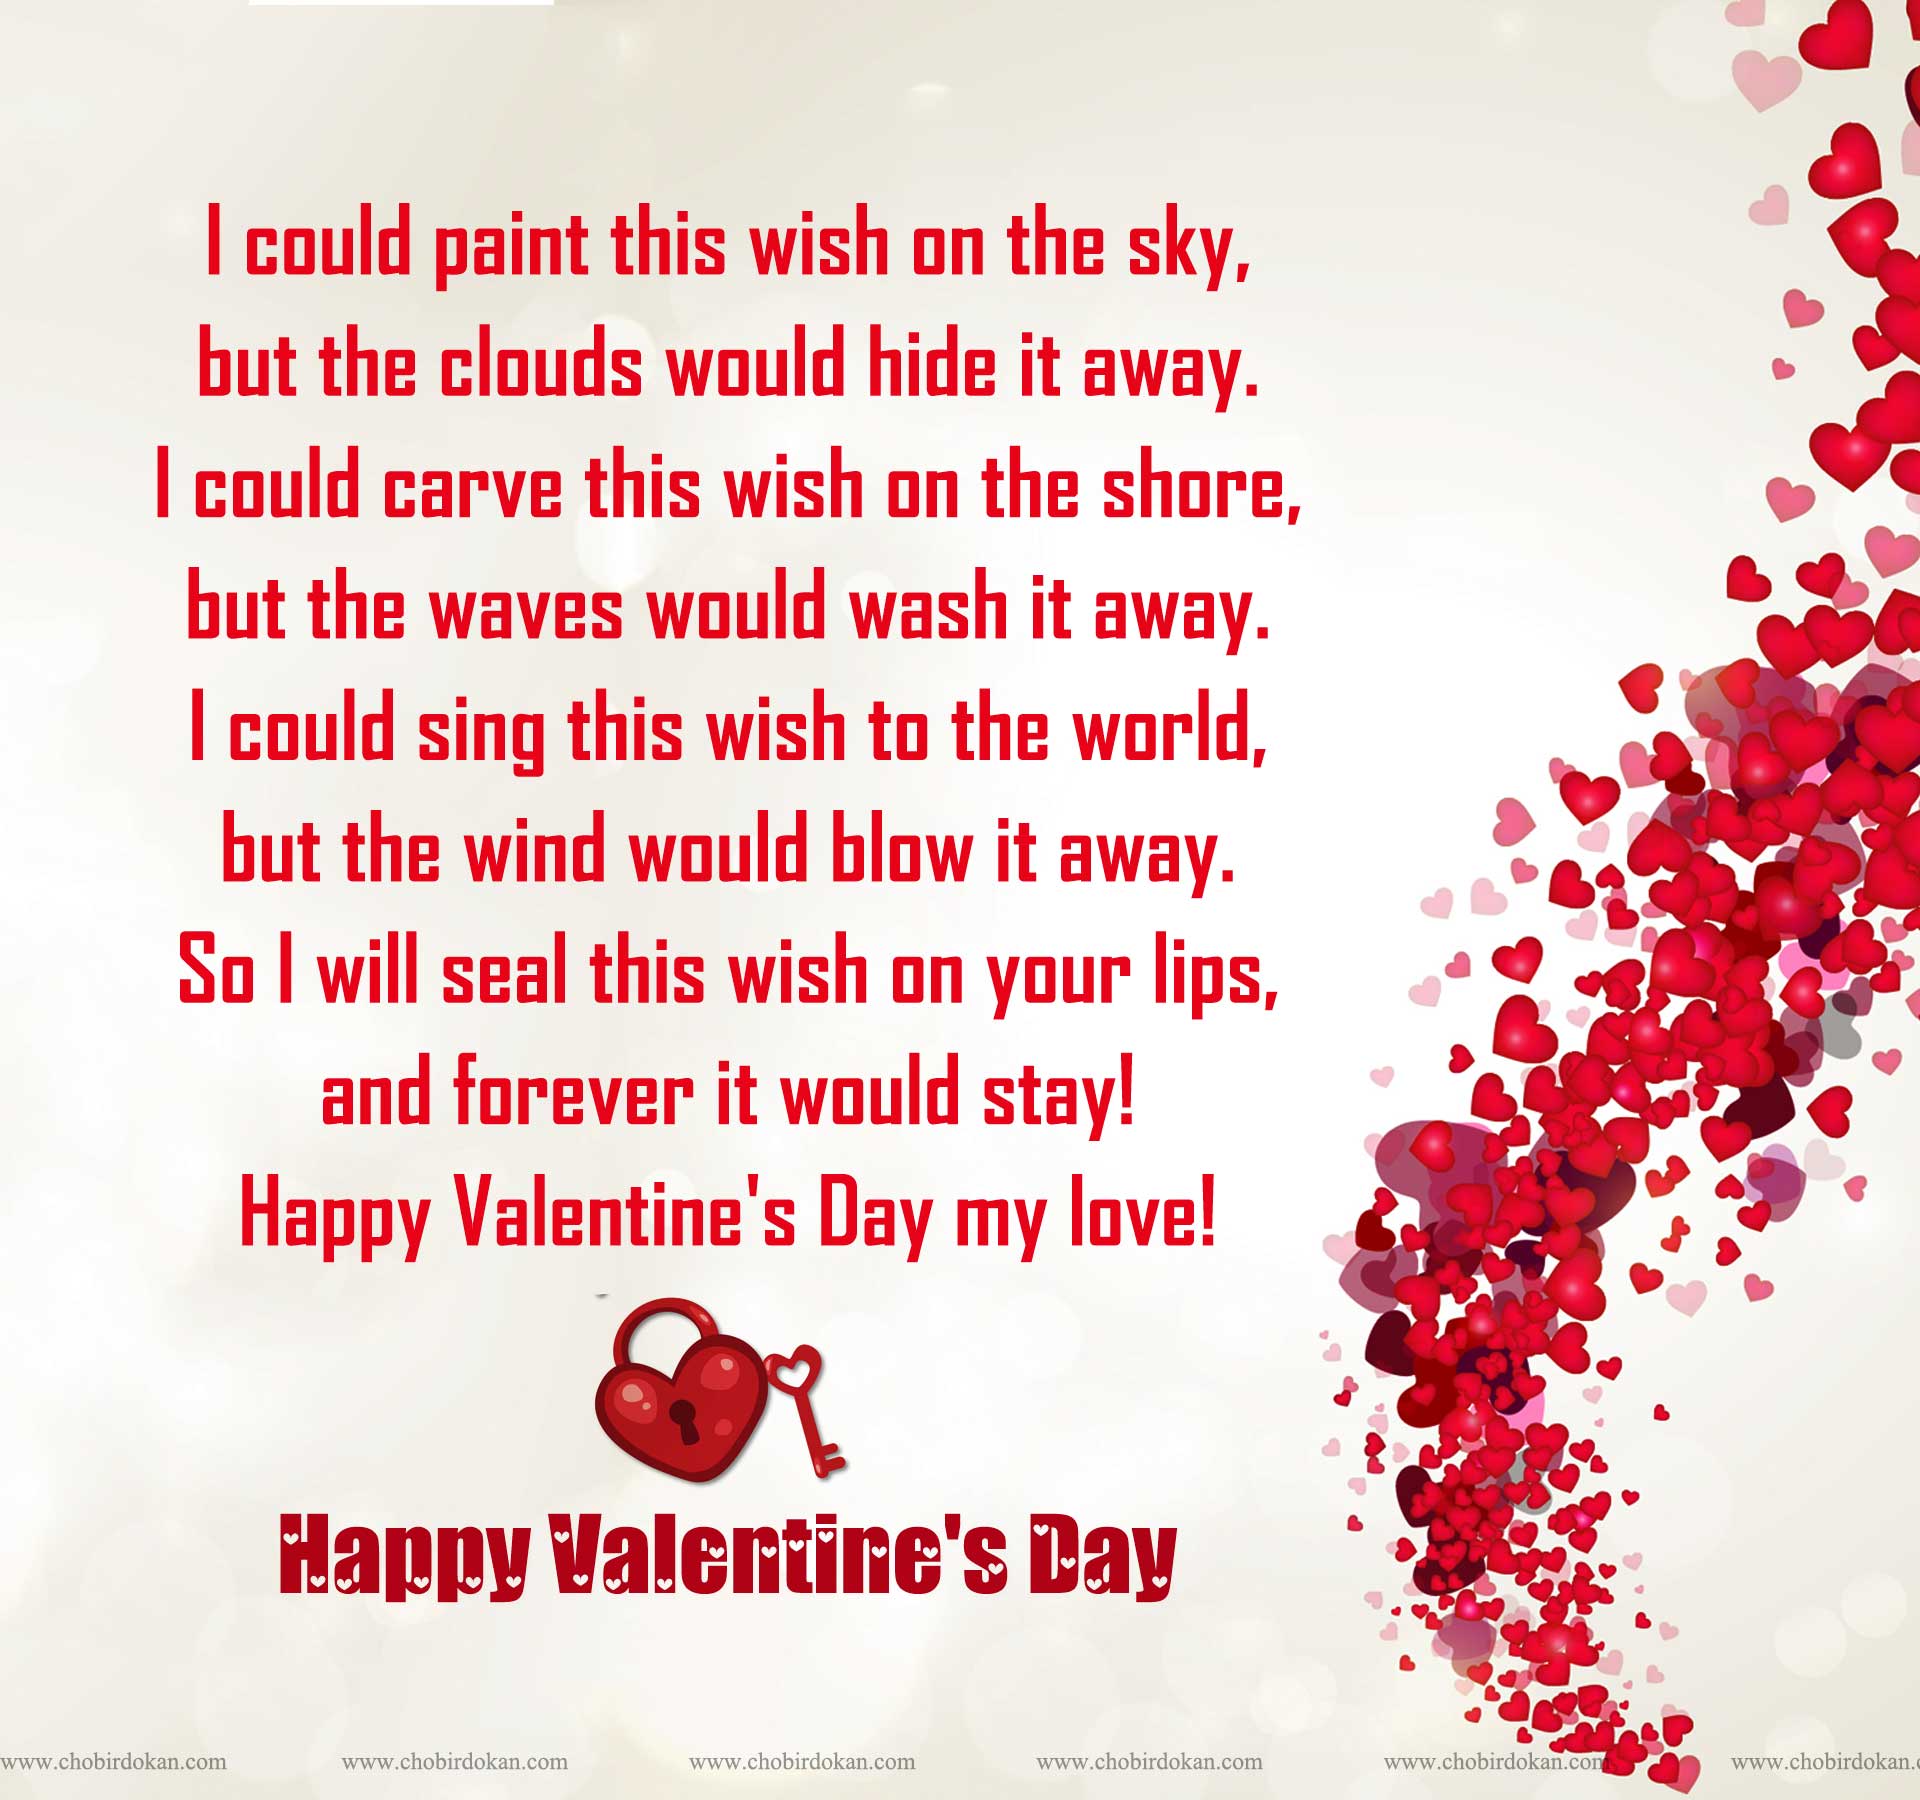 Happy Valentines Day Poems For Her, For Your Girlfriend or Wife|Poems|Chobirdokan1920 x 1800